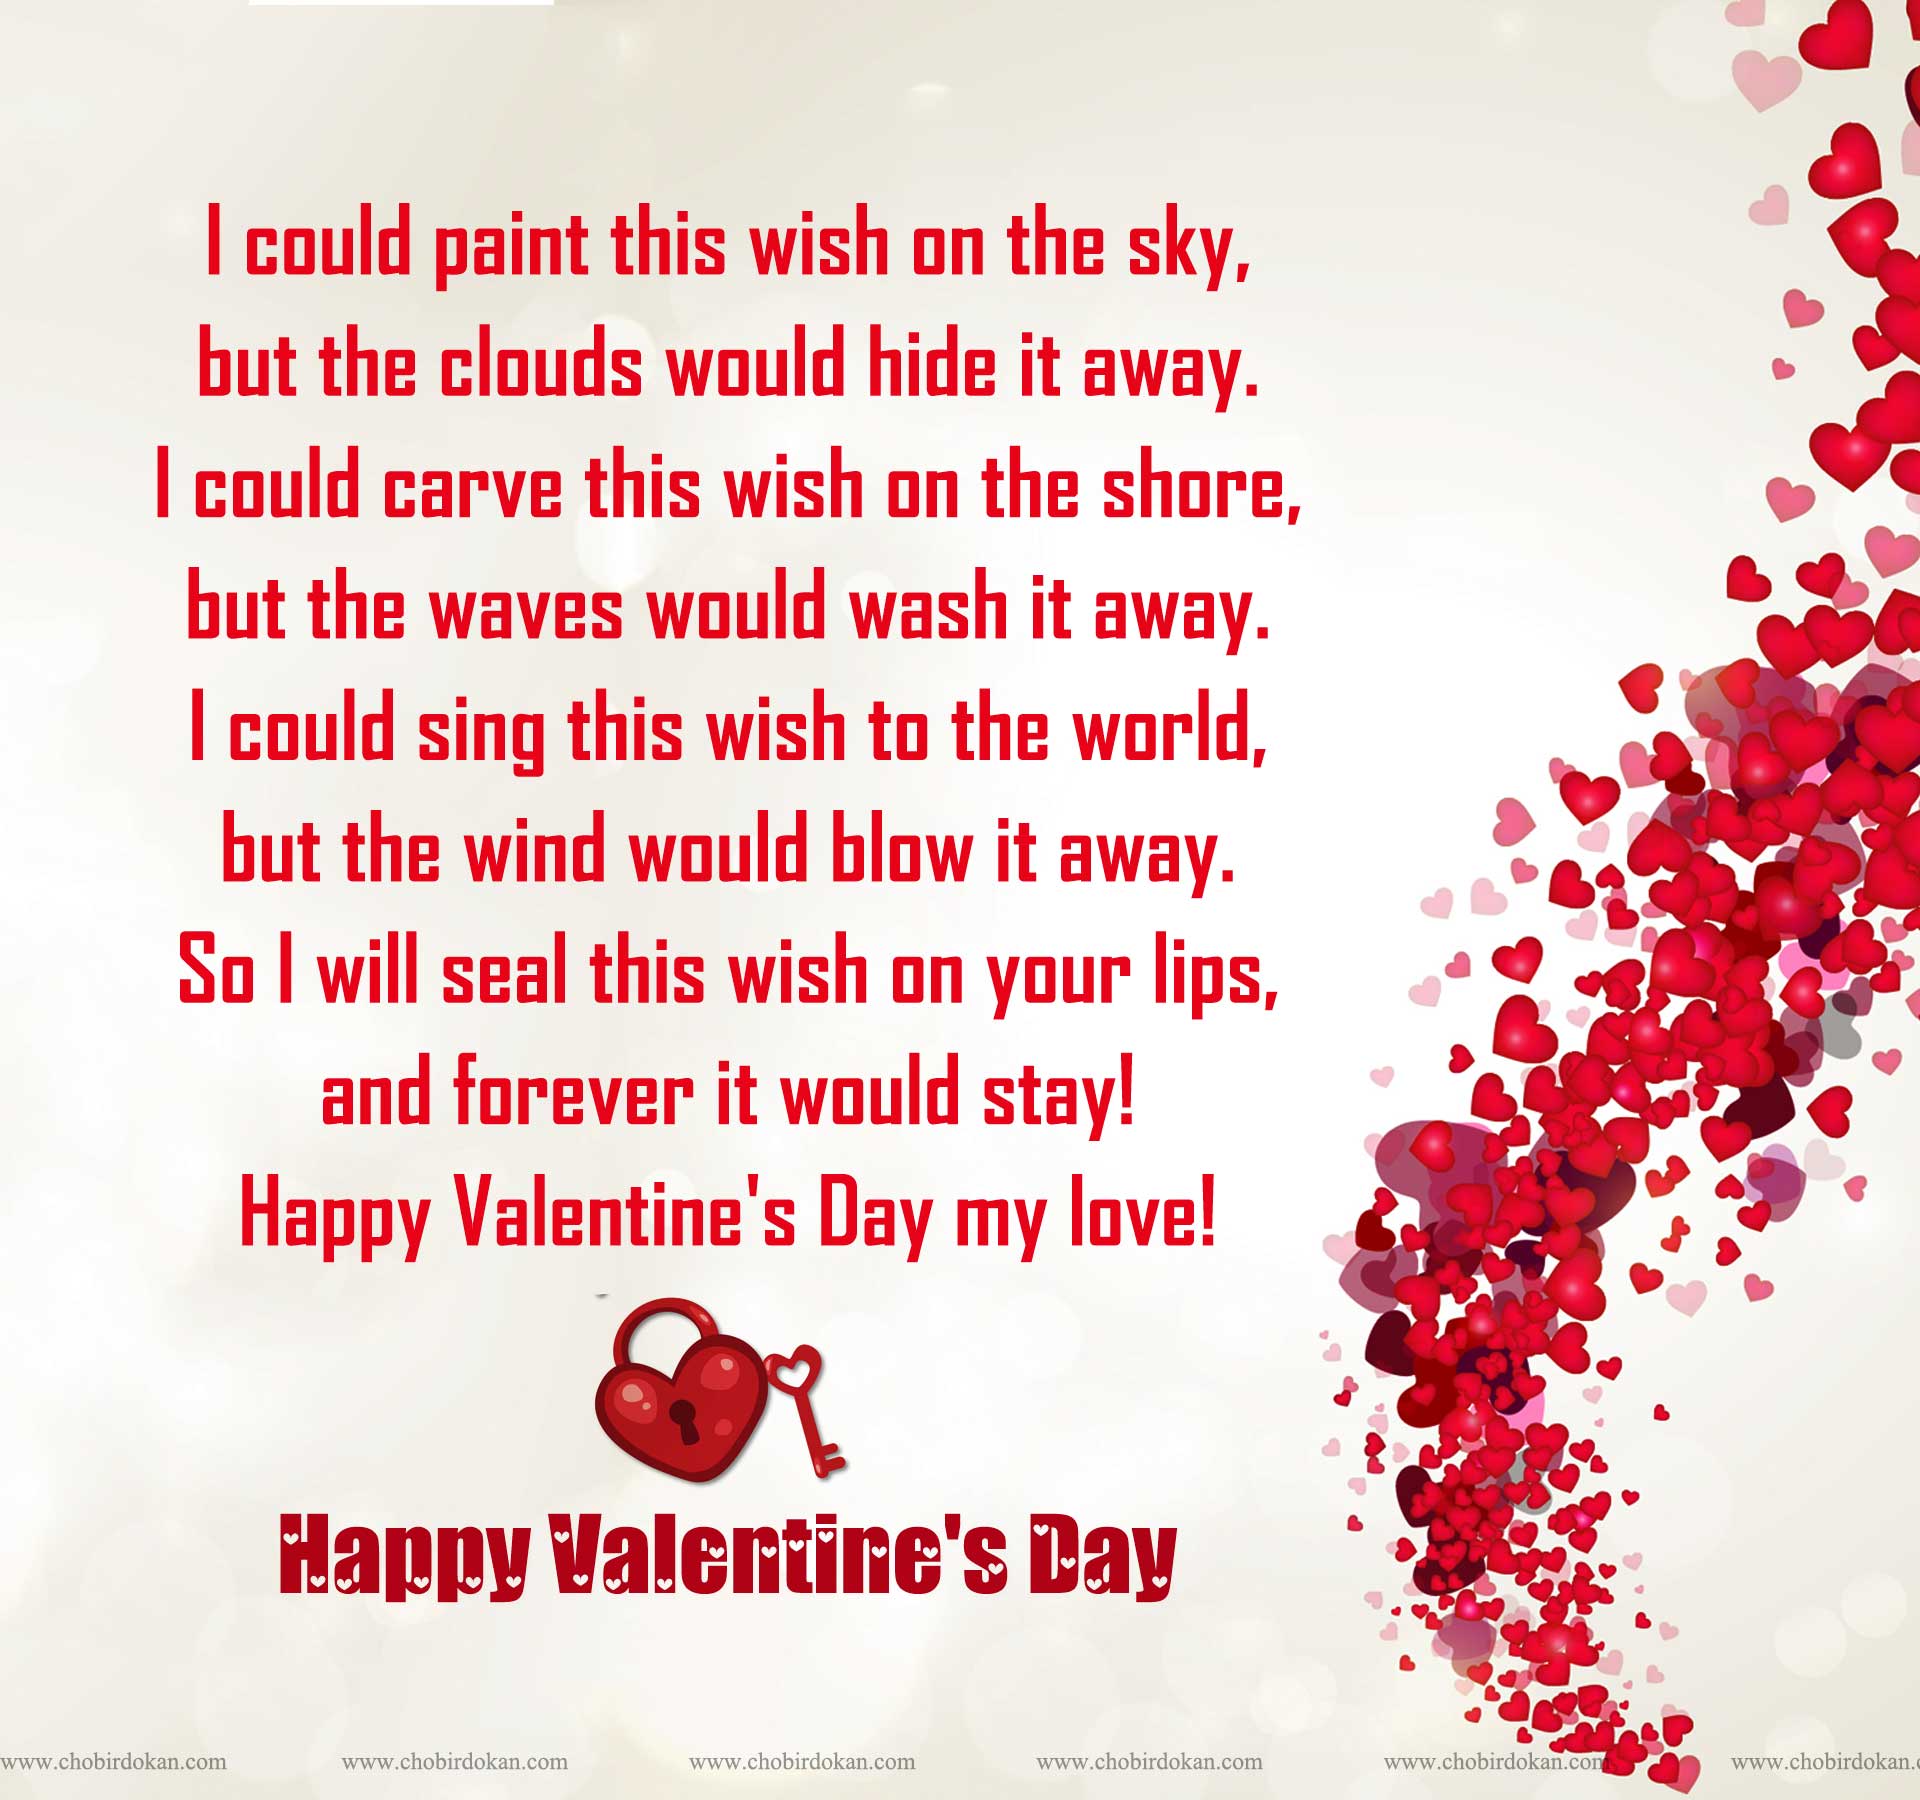 Happy Valentines Day Poems For Her, For Your Girlfriend or Wife|Poems|Chobirdokan1920 x 1800